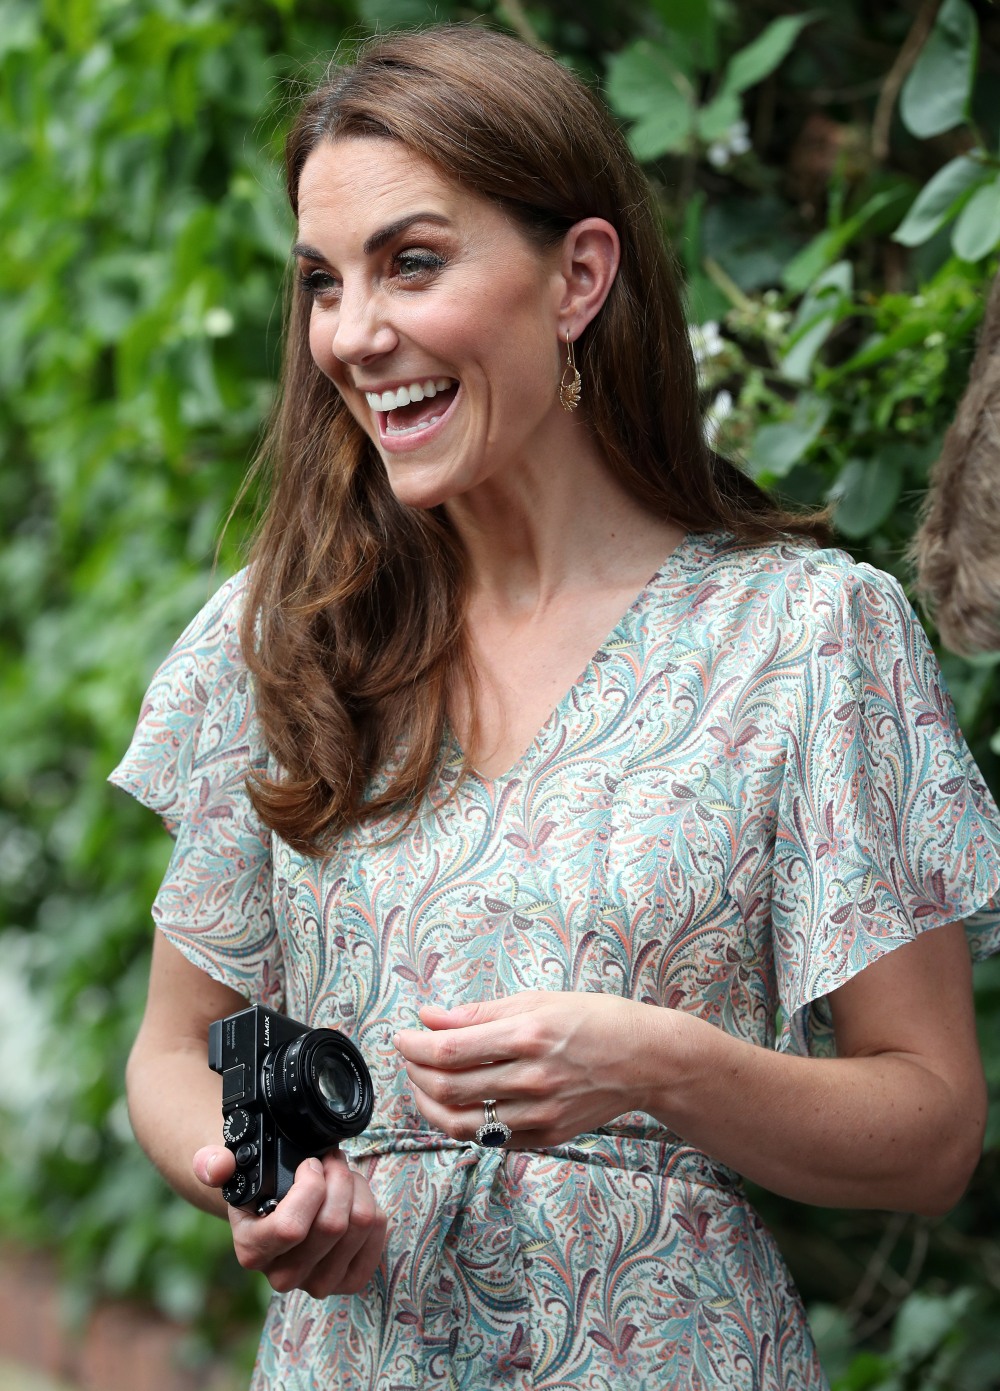 The Duchess Of Cambridge Joins Photography Workshop With Action For Children